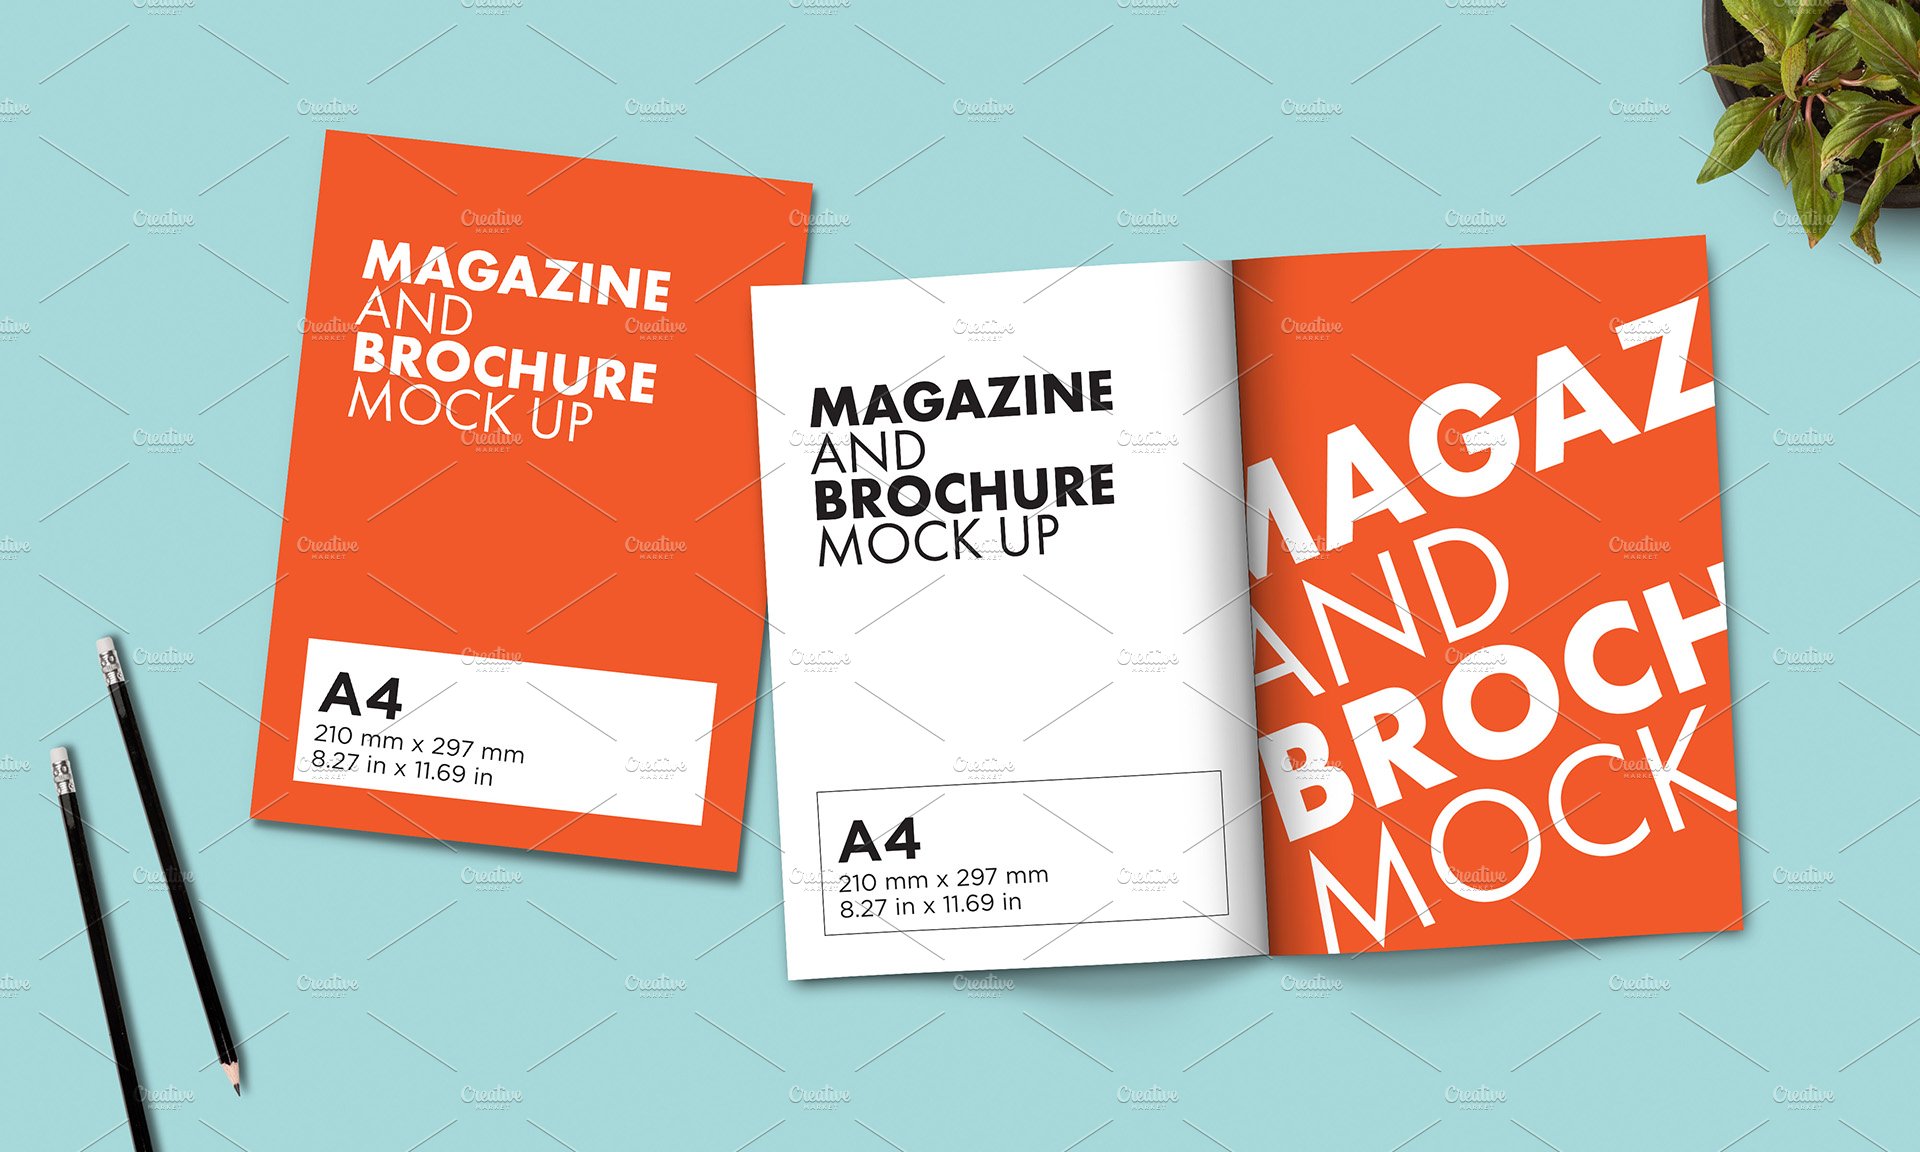 A4 Brochure and Magazine mock-up preview image.